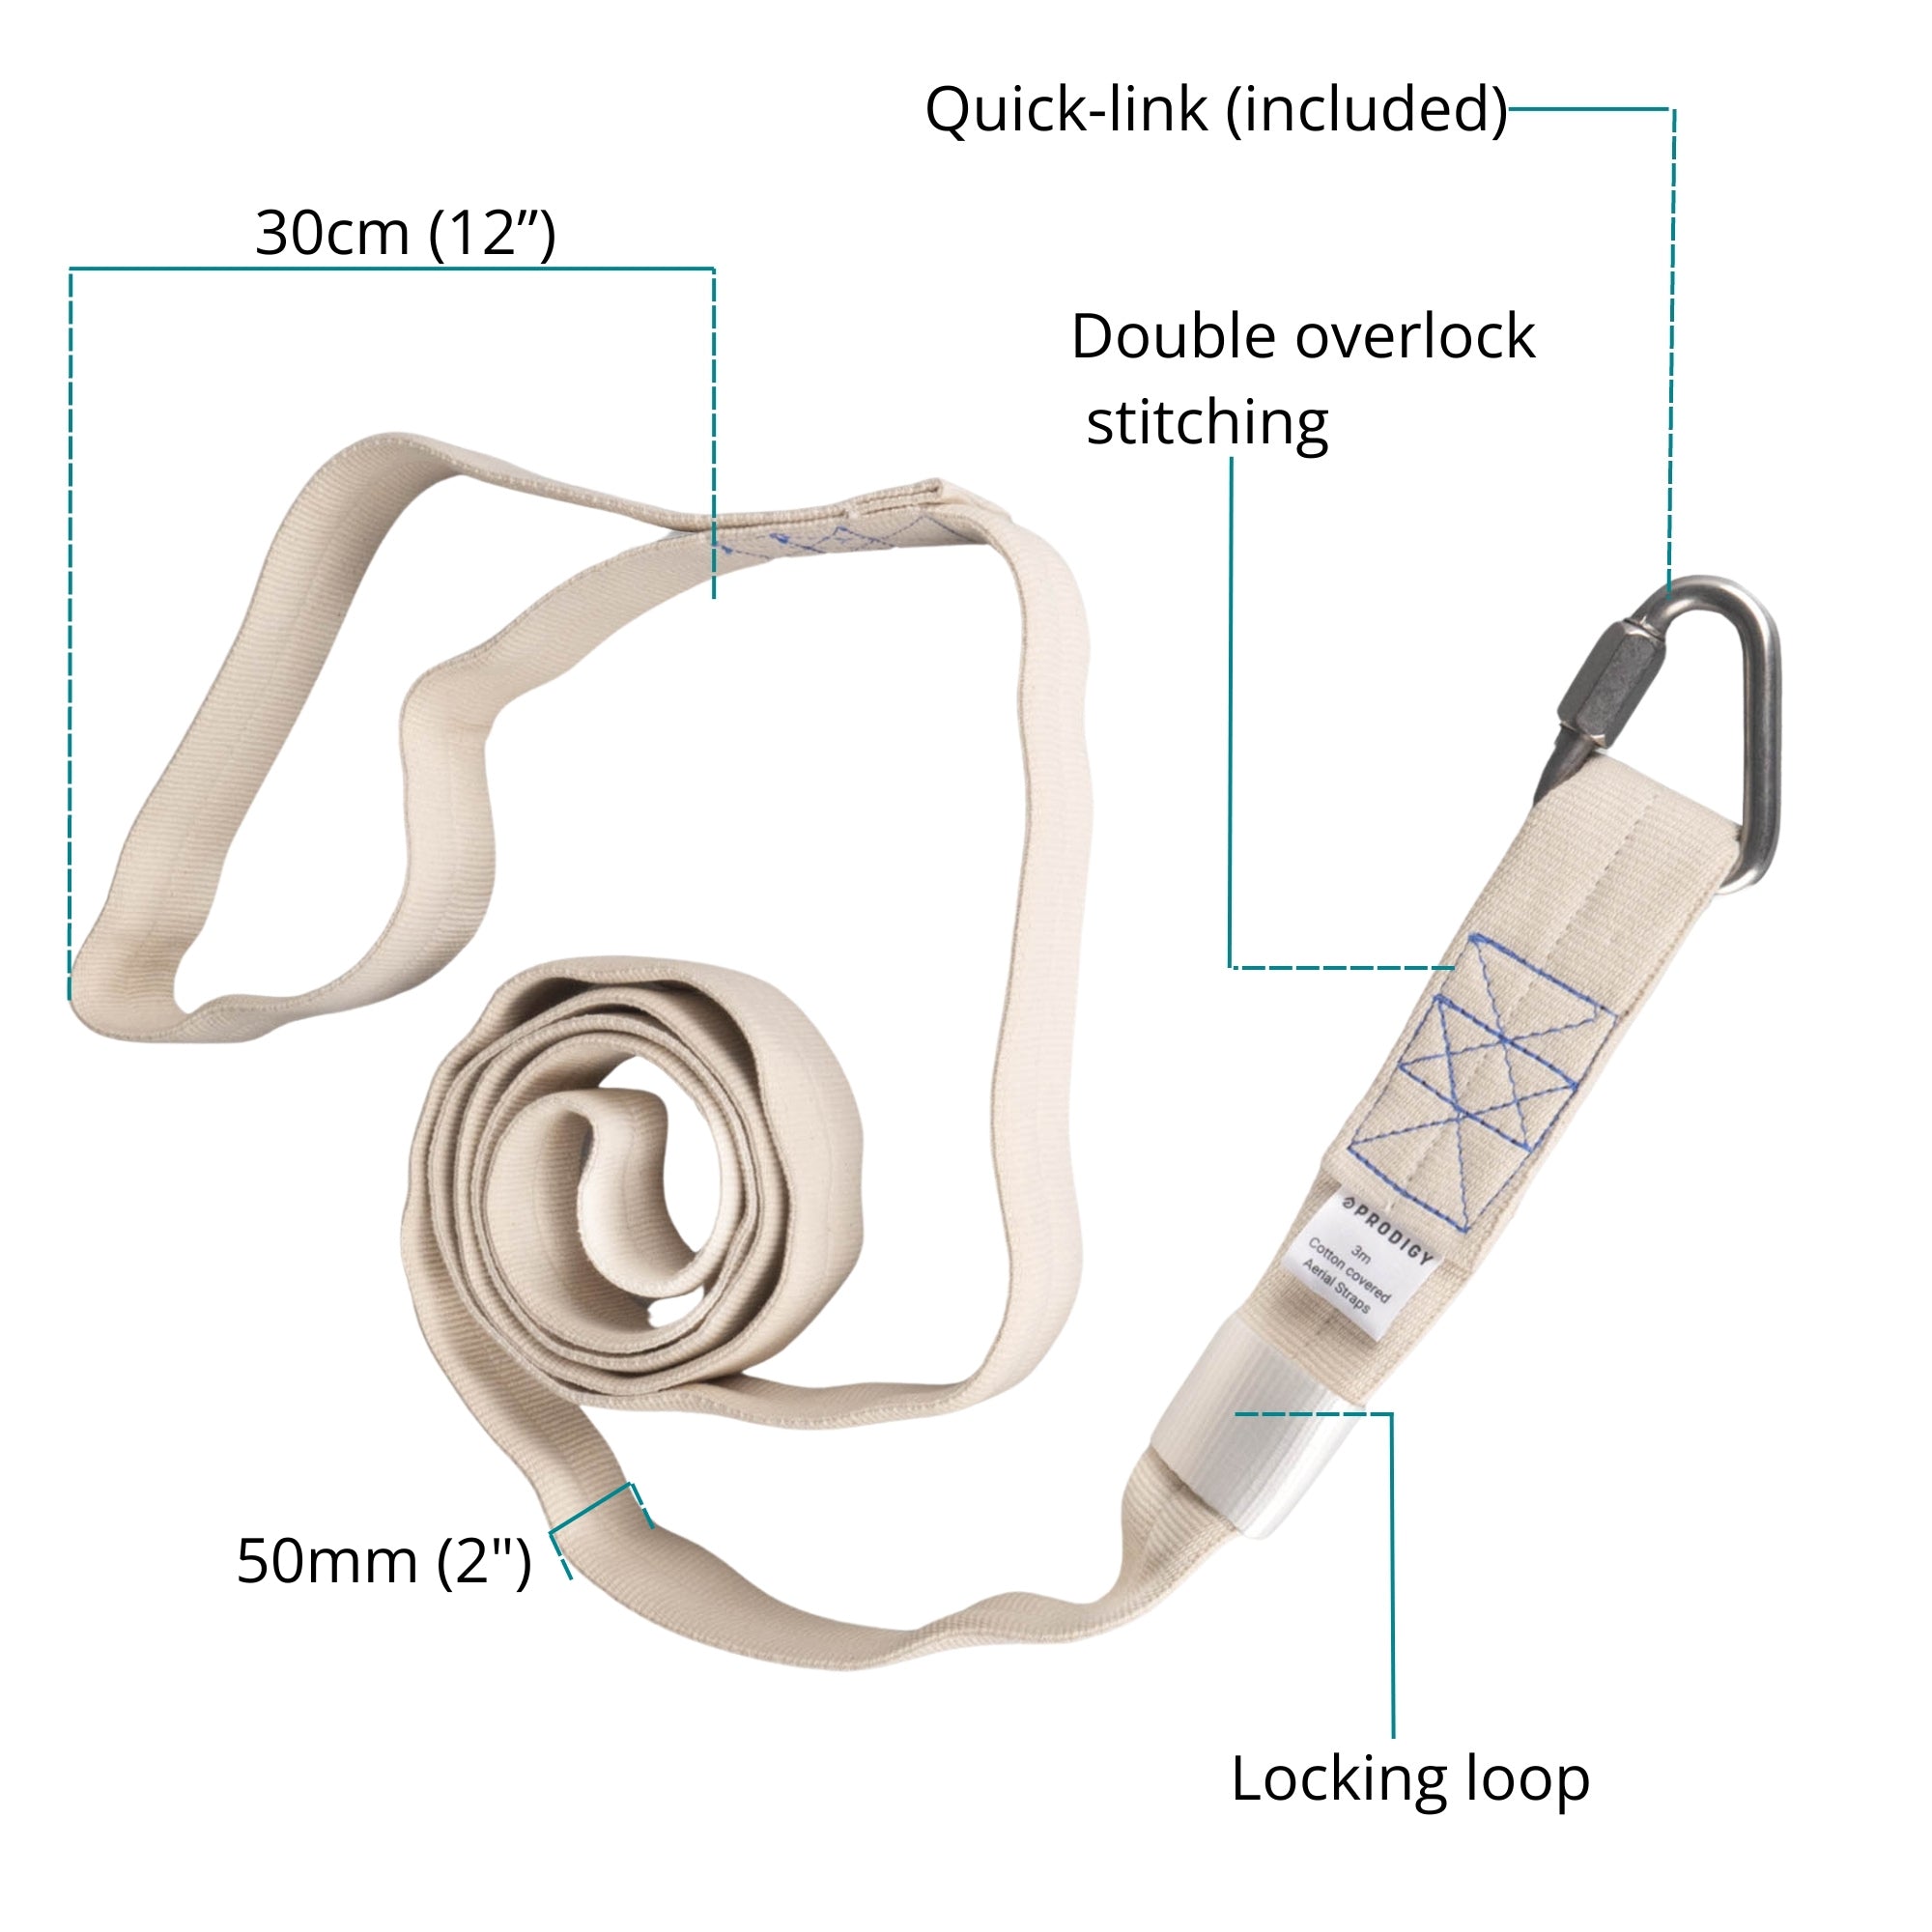 cotton covered aerial straps info